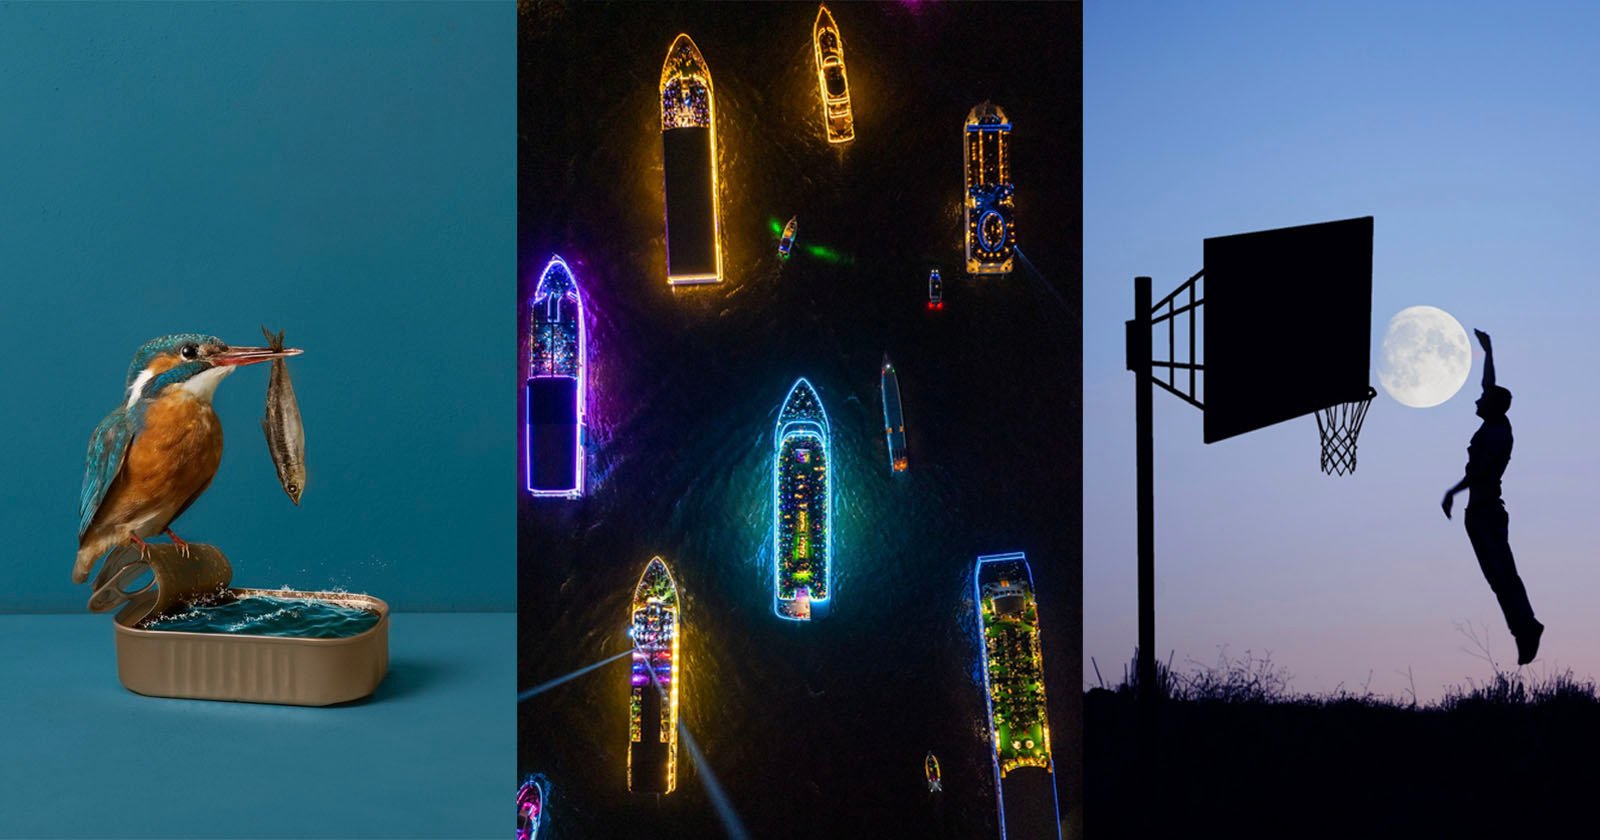 Color Photography Competition Celebrates All the World’s Hues